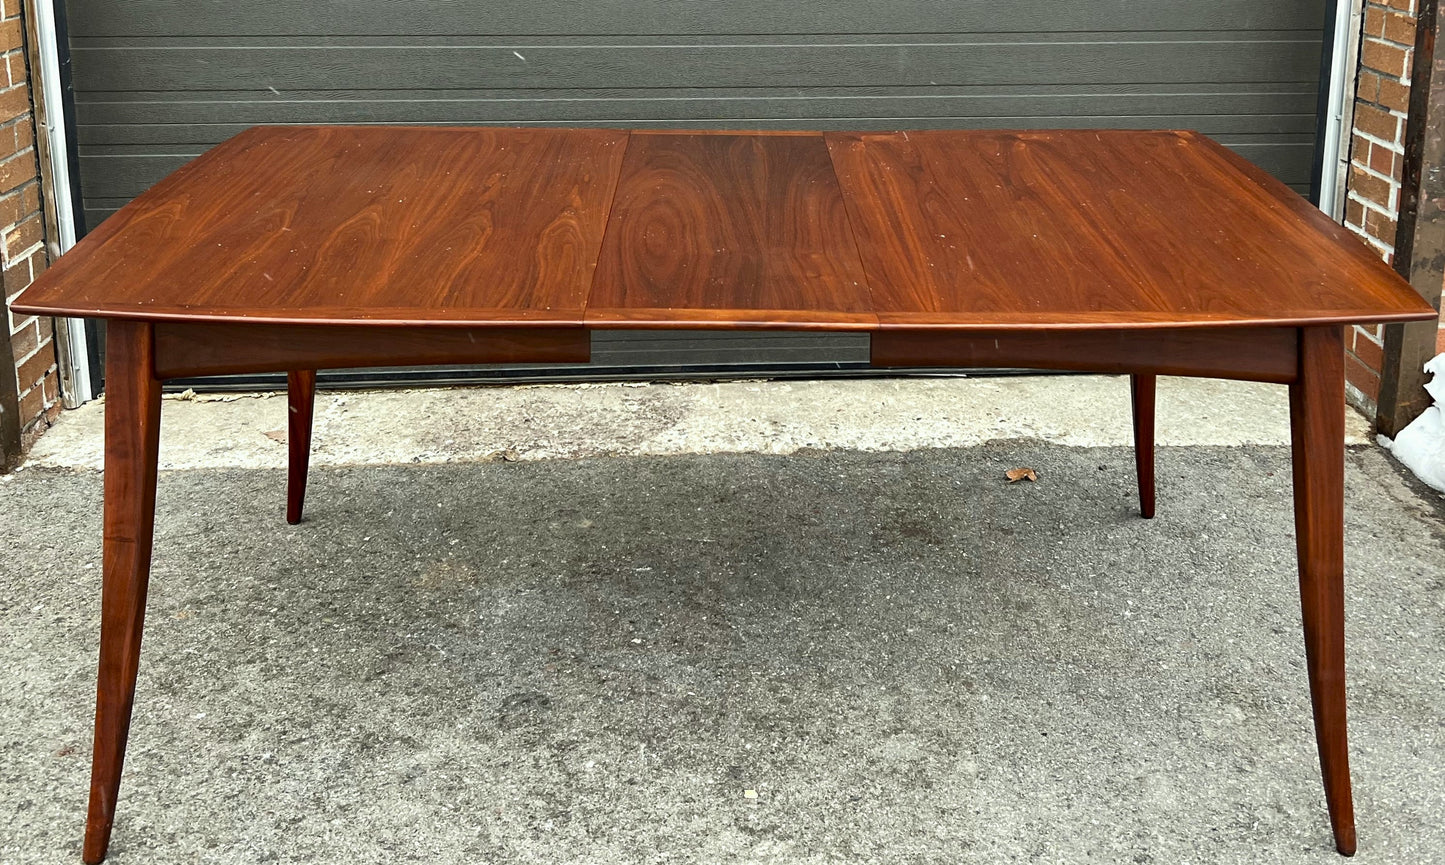 REFINISHED Mid Century Modern Walnut Table w 3 Leaves by R. Spanner 55"- 97"